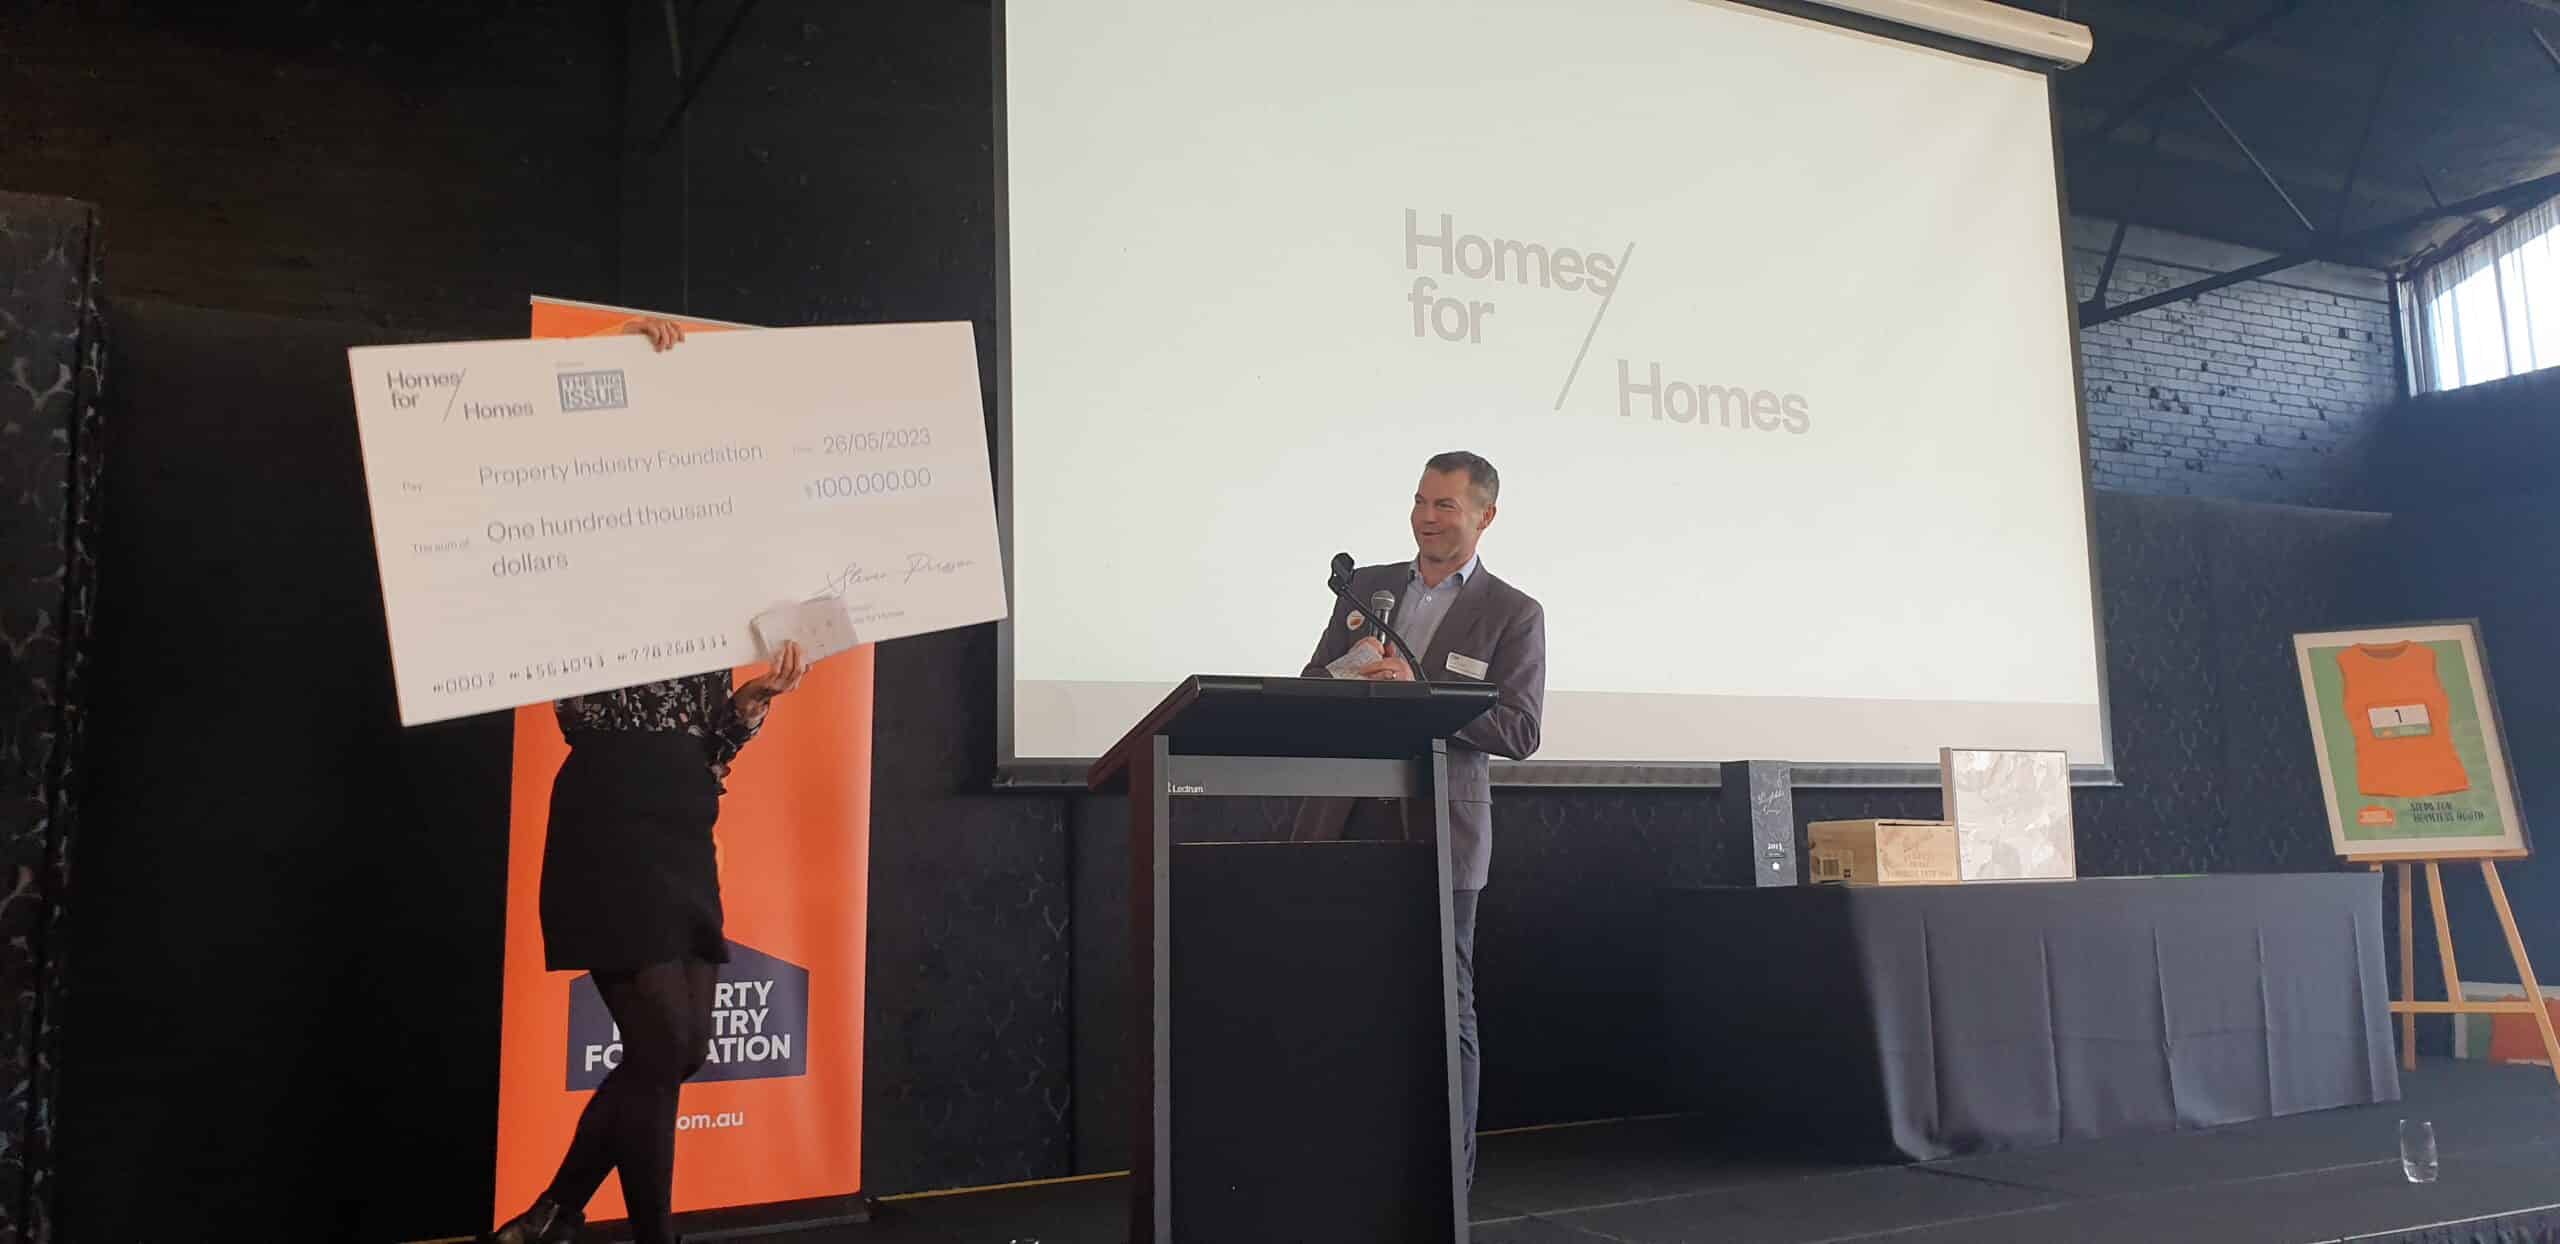 100K Grant from Homes for Homes